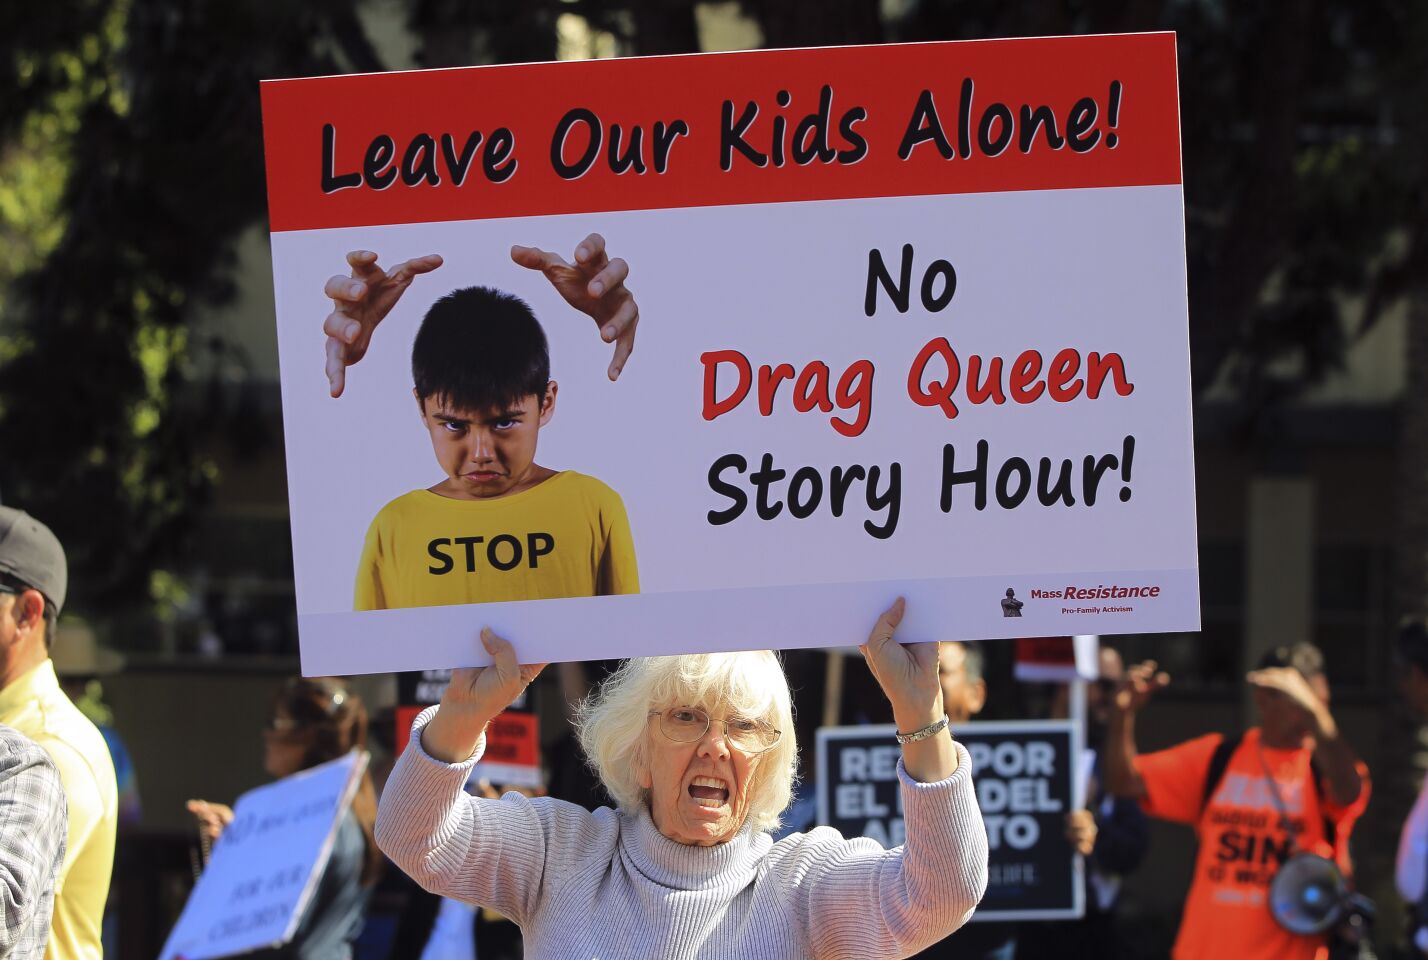 Karen Grube yells at supporters of the Drag Queen Story Hour while she stands with protesters against the story hour at the Chula Vista Public Library Civic Center Branch on Tuesday, September 10, 2019 in Chula Vista, California.